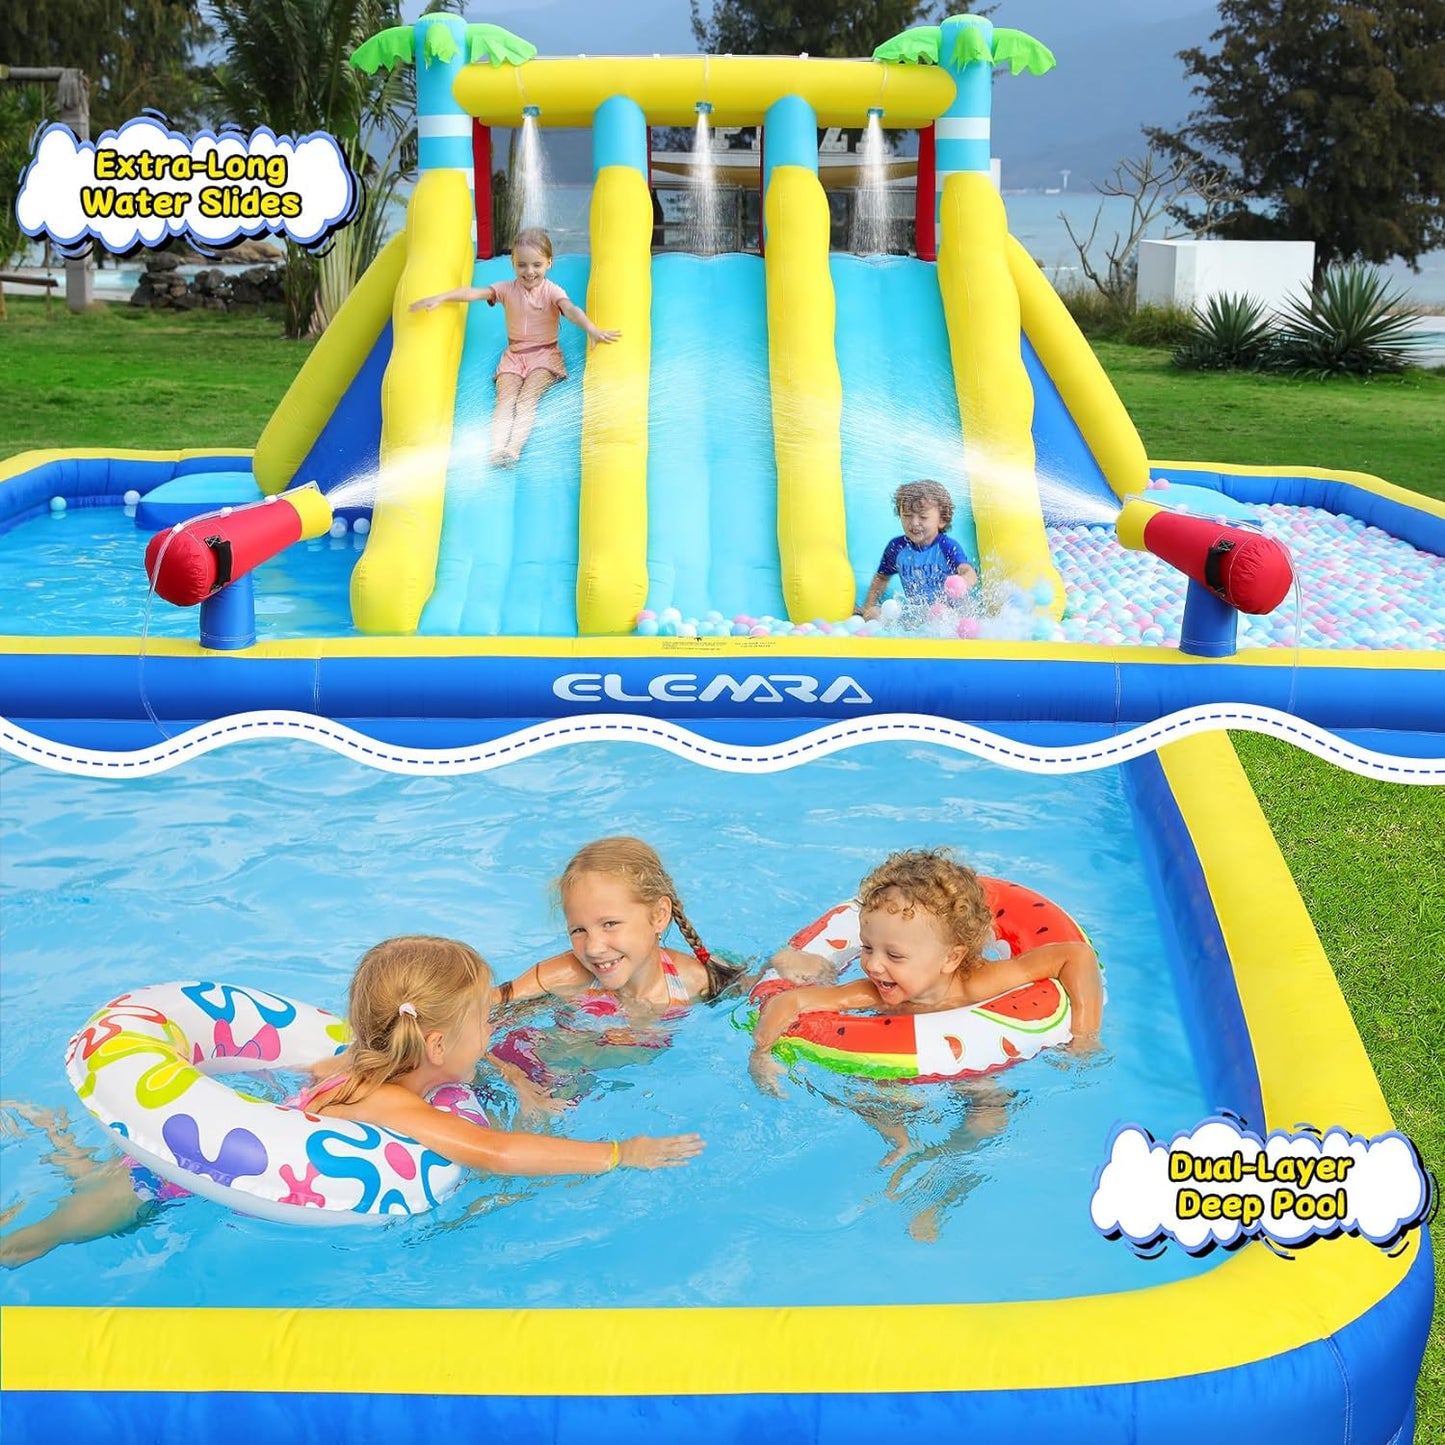 20.66X16.4Ft Inflatable Water Slide for Big Kids, Water Park for Kids Backyard with Large Double-Layer Pool,3 Extra-Long Slides,Climbing Wall, 2 Water Cannons, Water Spraying, 750W Air Blower